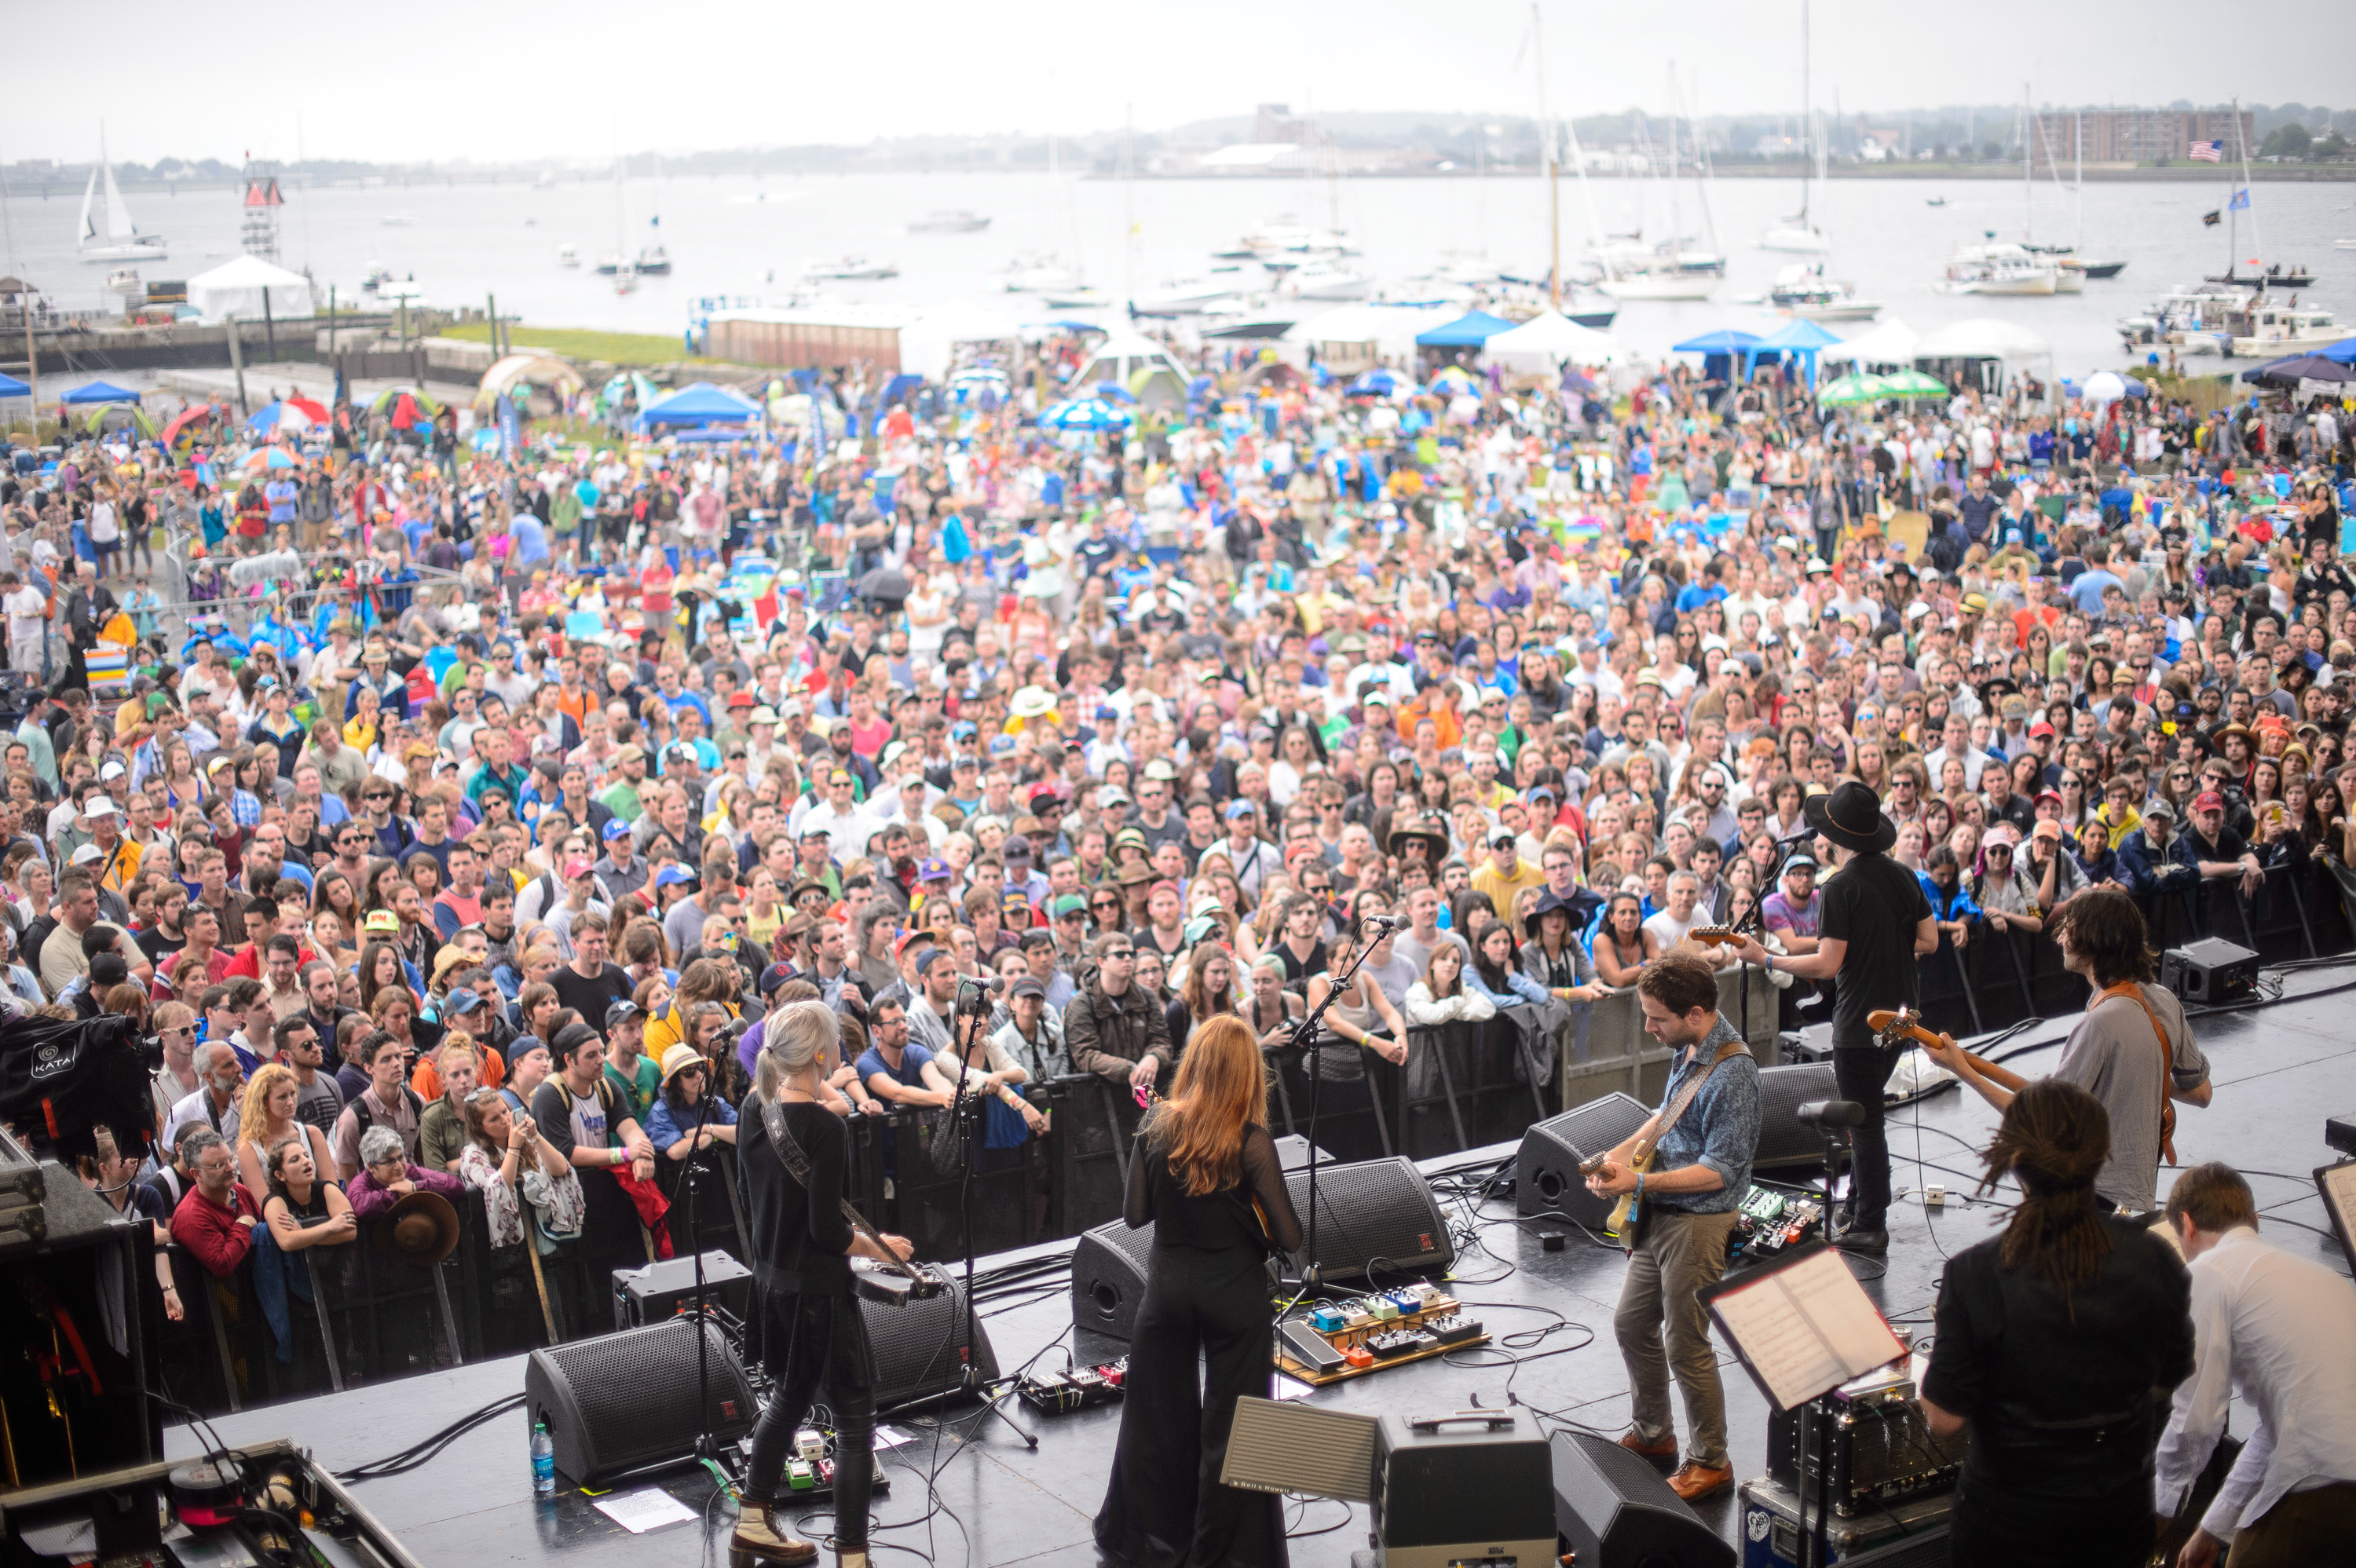 Conor Oberst performs at the 2014 Newport Folk Festival